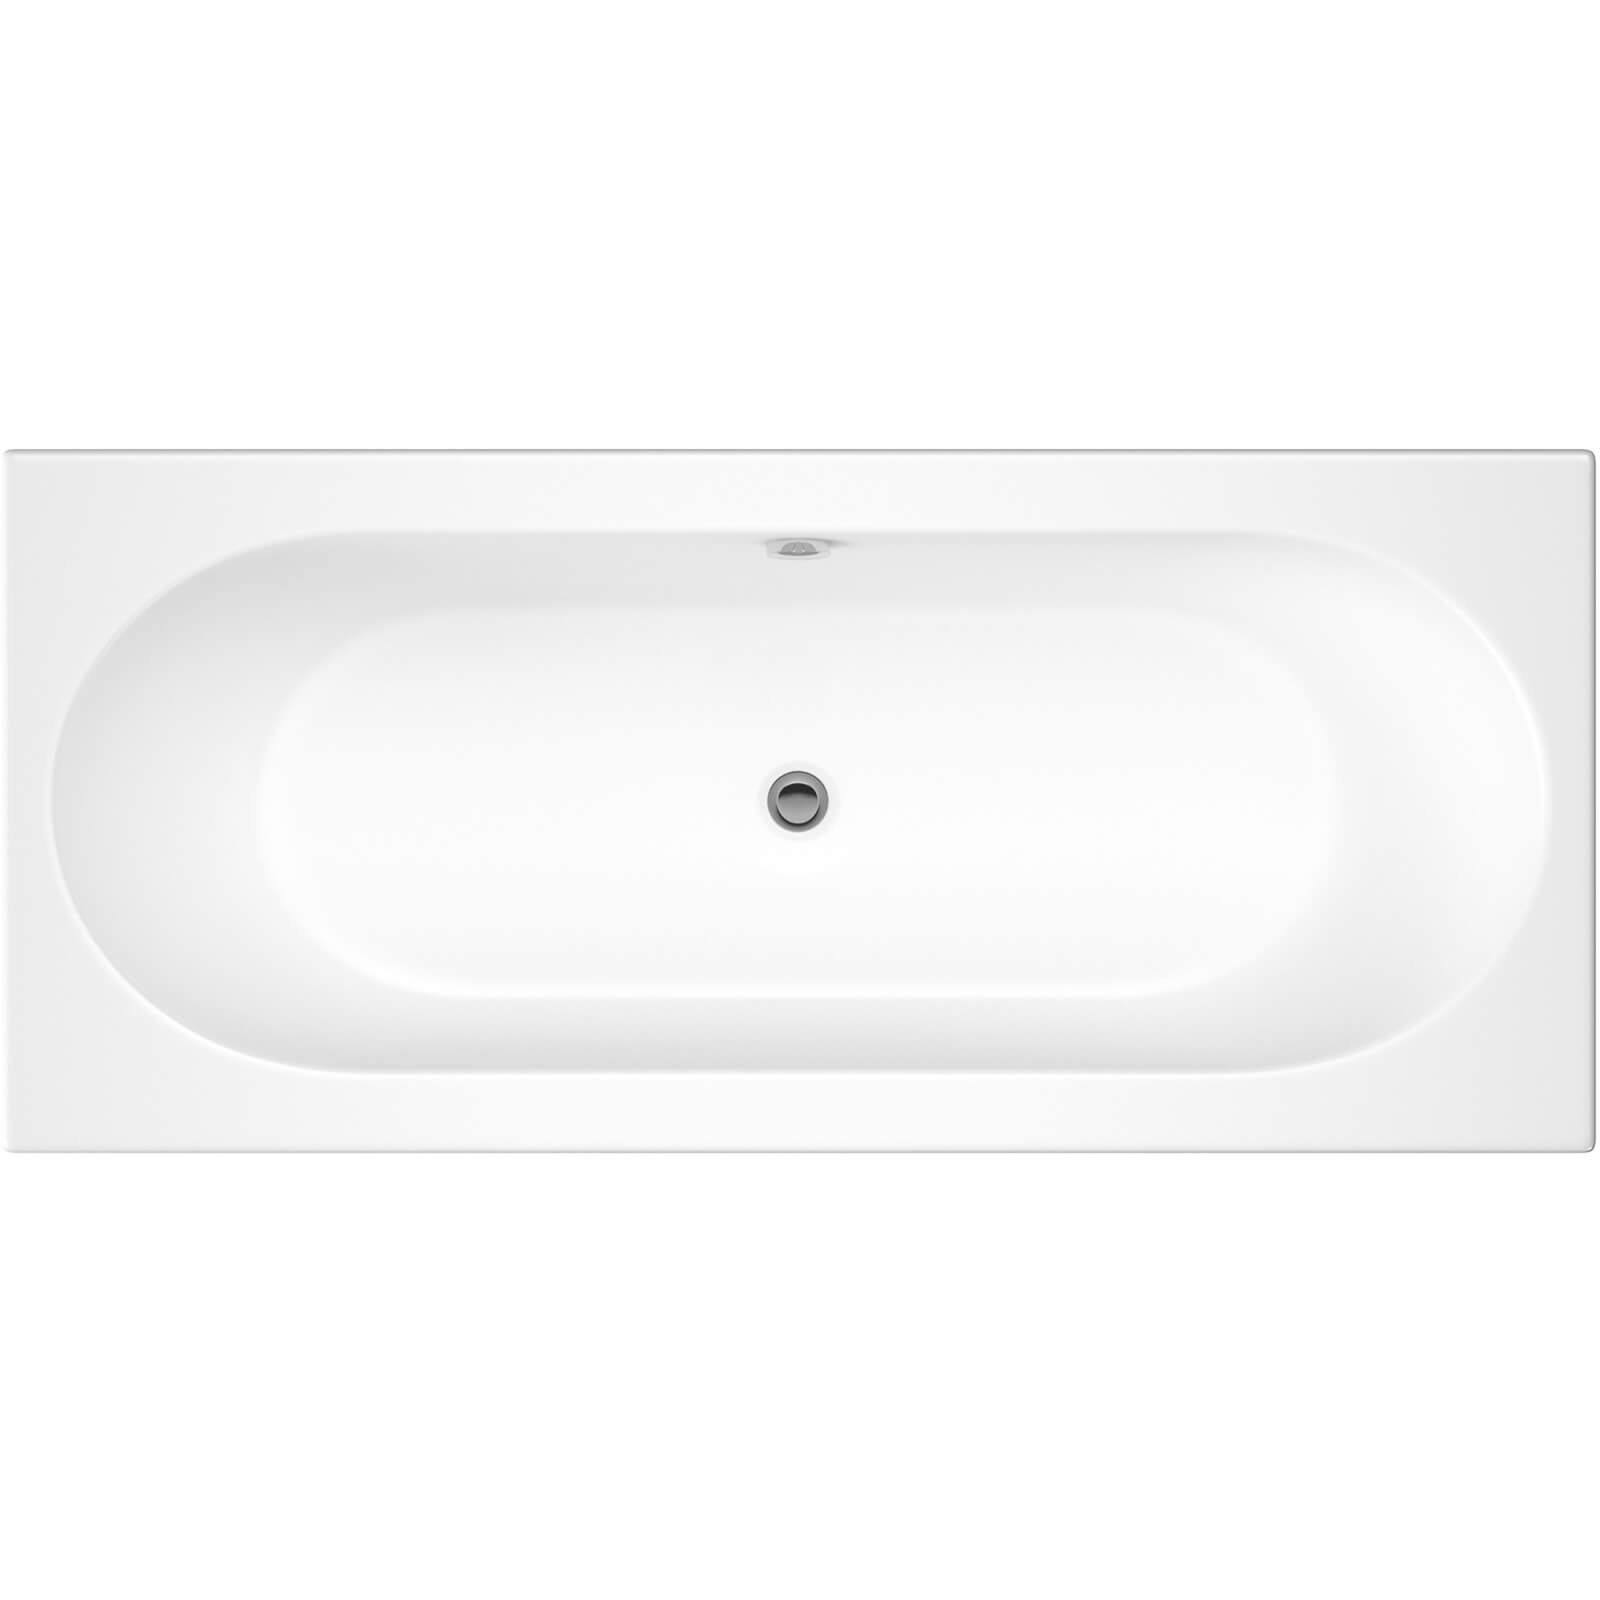 Photo of Balterley Round Double Ended Bath - 1800mm X 800mm